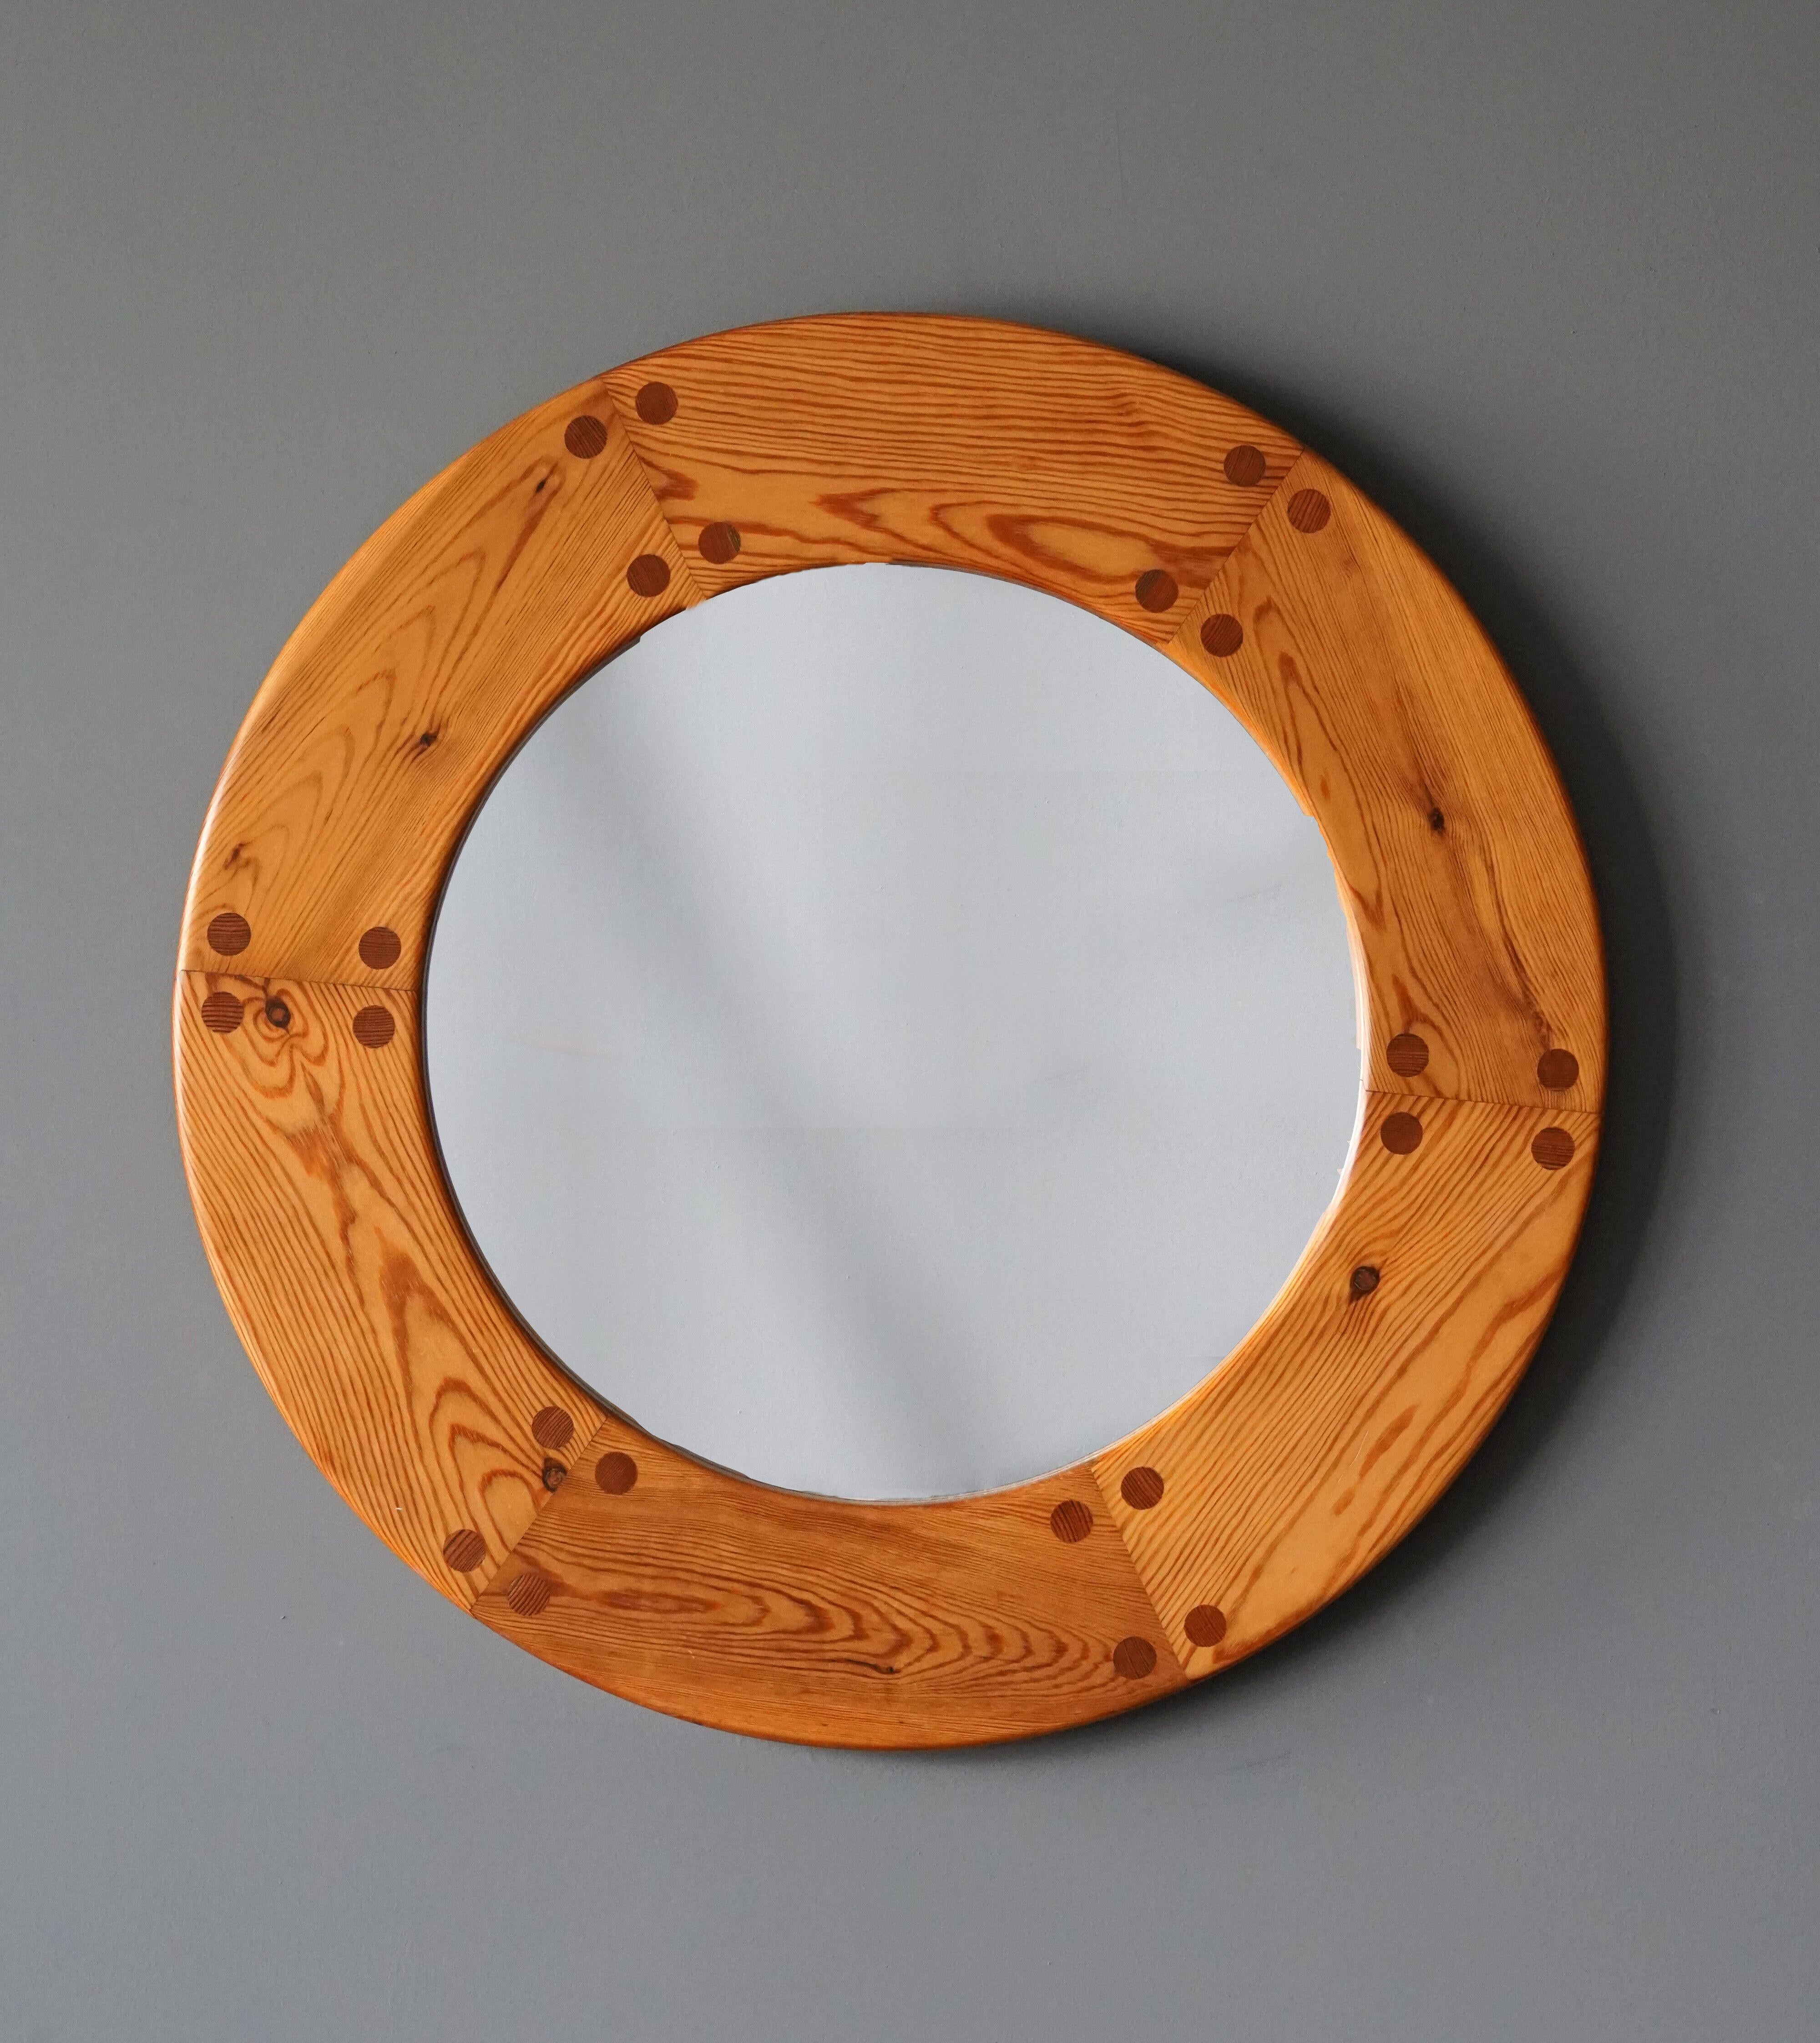 A sculptural round wall mirror. Designed by Uno Kristiansson, for Luxus, Sweden, 1960s. Features revealed teak-colored joinery. 

Other designers of the period include Axel Einar Hjorth, Roland Wilhelmsson, Charlotte Perriand, Pierre Chapo, and